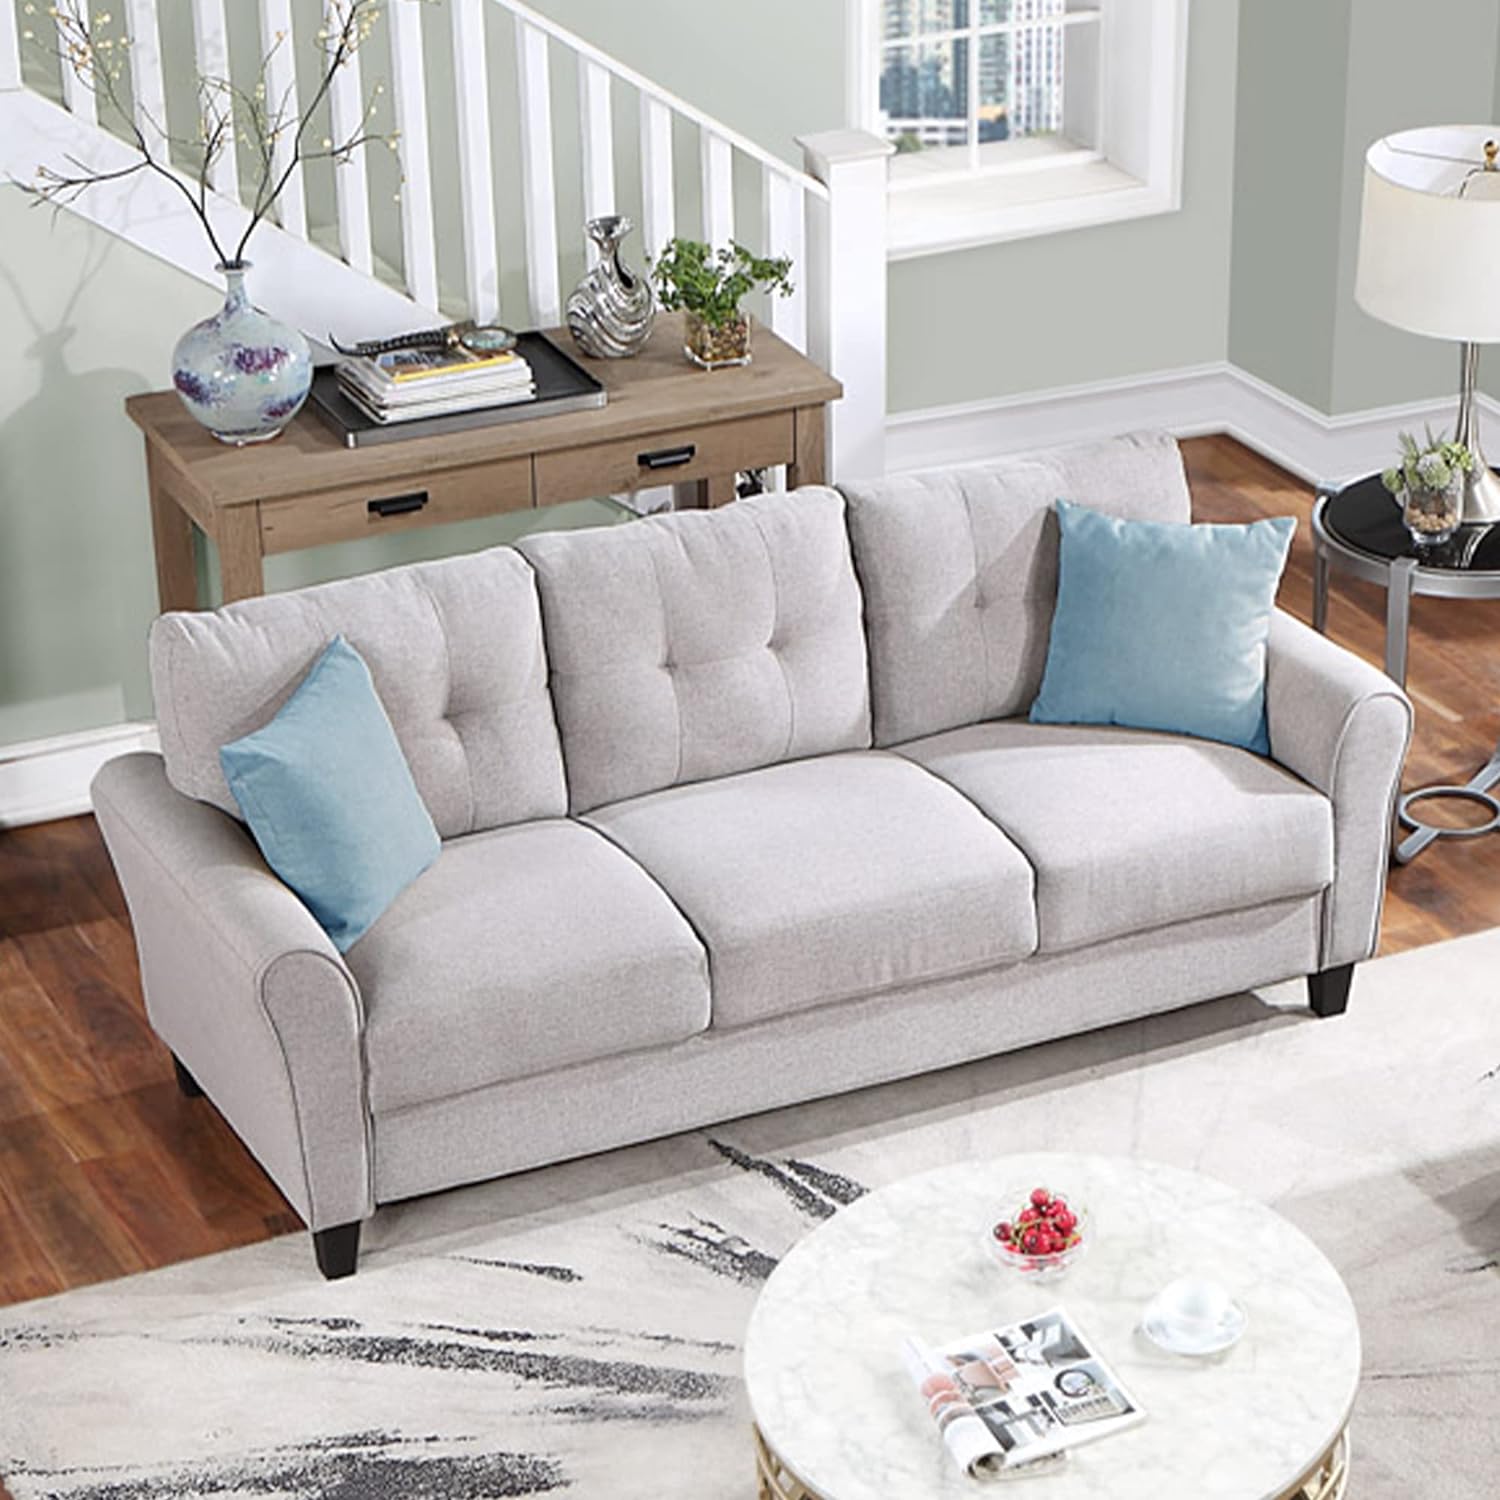 Harper & Bright Designs 79.9 Modern Style Button Tufted Linen Upholstered 3-seat Sofa, Three Seat Sofa Couch, Living Room Sofa for Home or Office, Light Gray